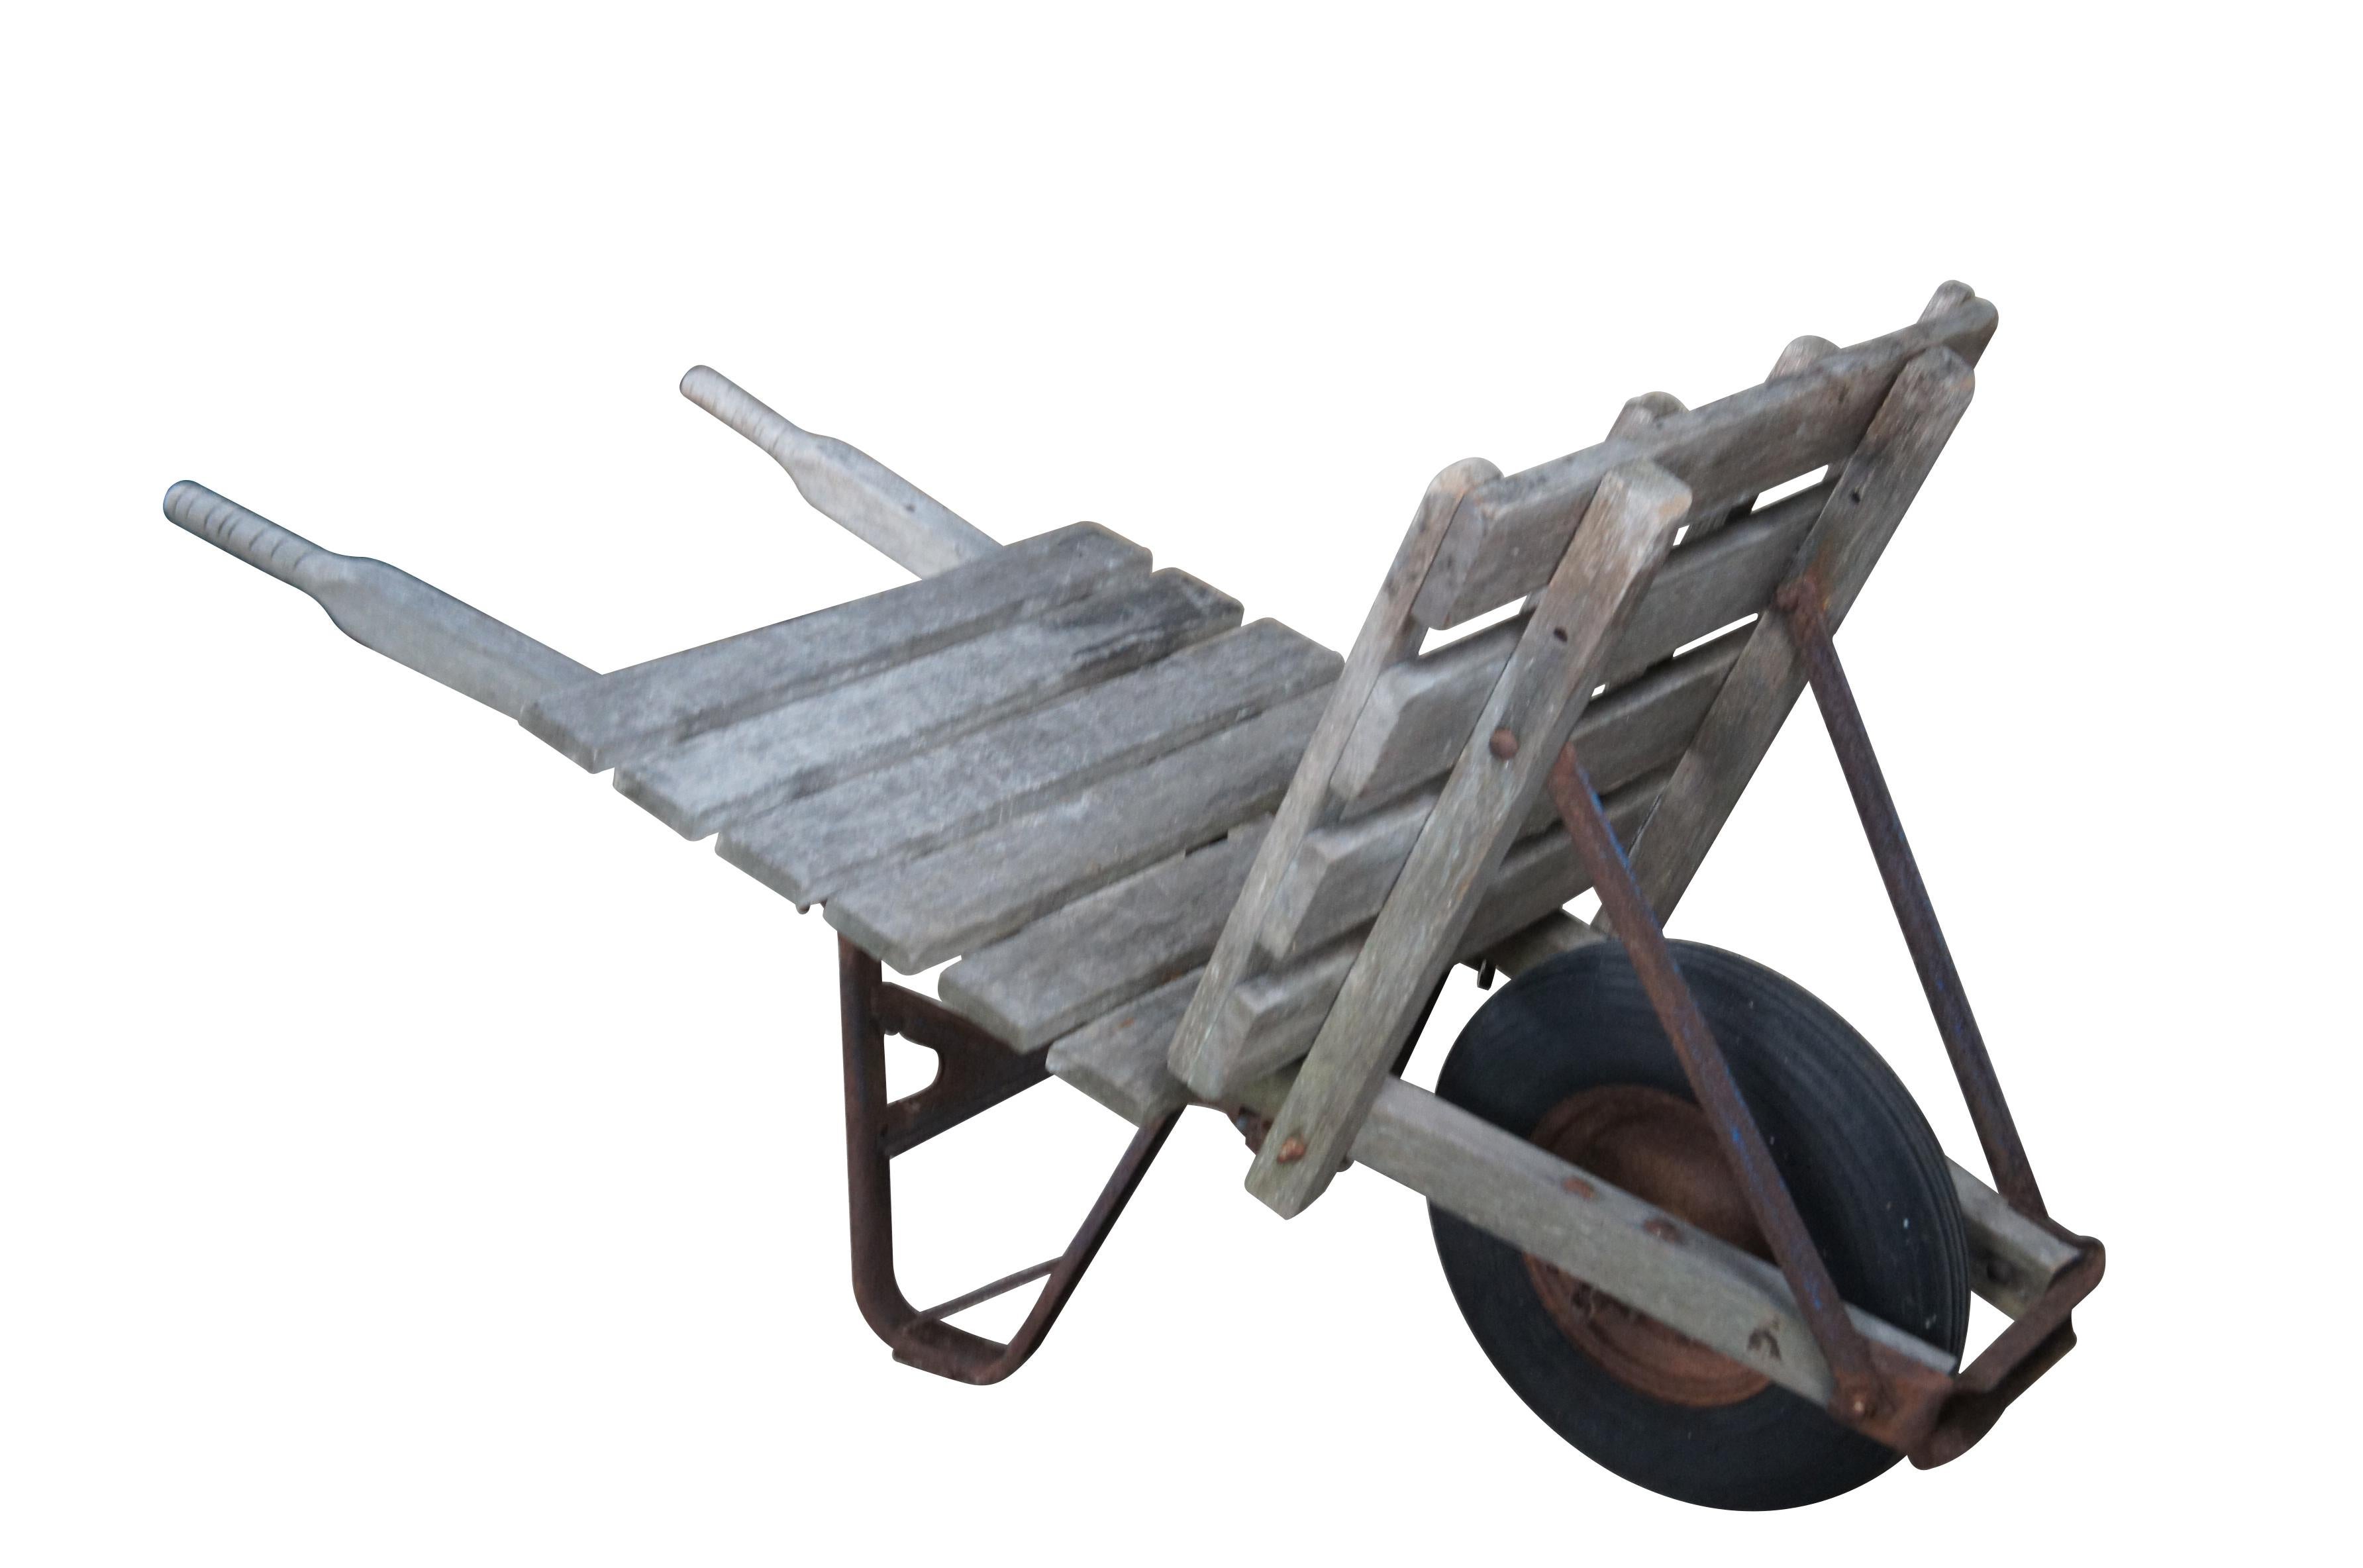 1940s Flat-bed wheel barrow.  Intended for bricks or hay.  Features a wooden frame on wheel with metal support.  

Dimensions:
61